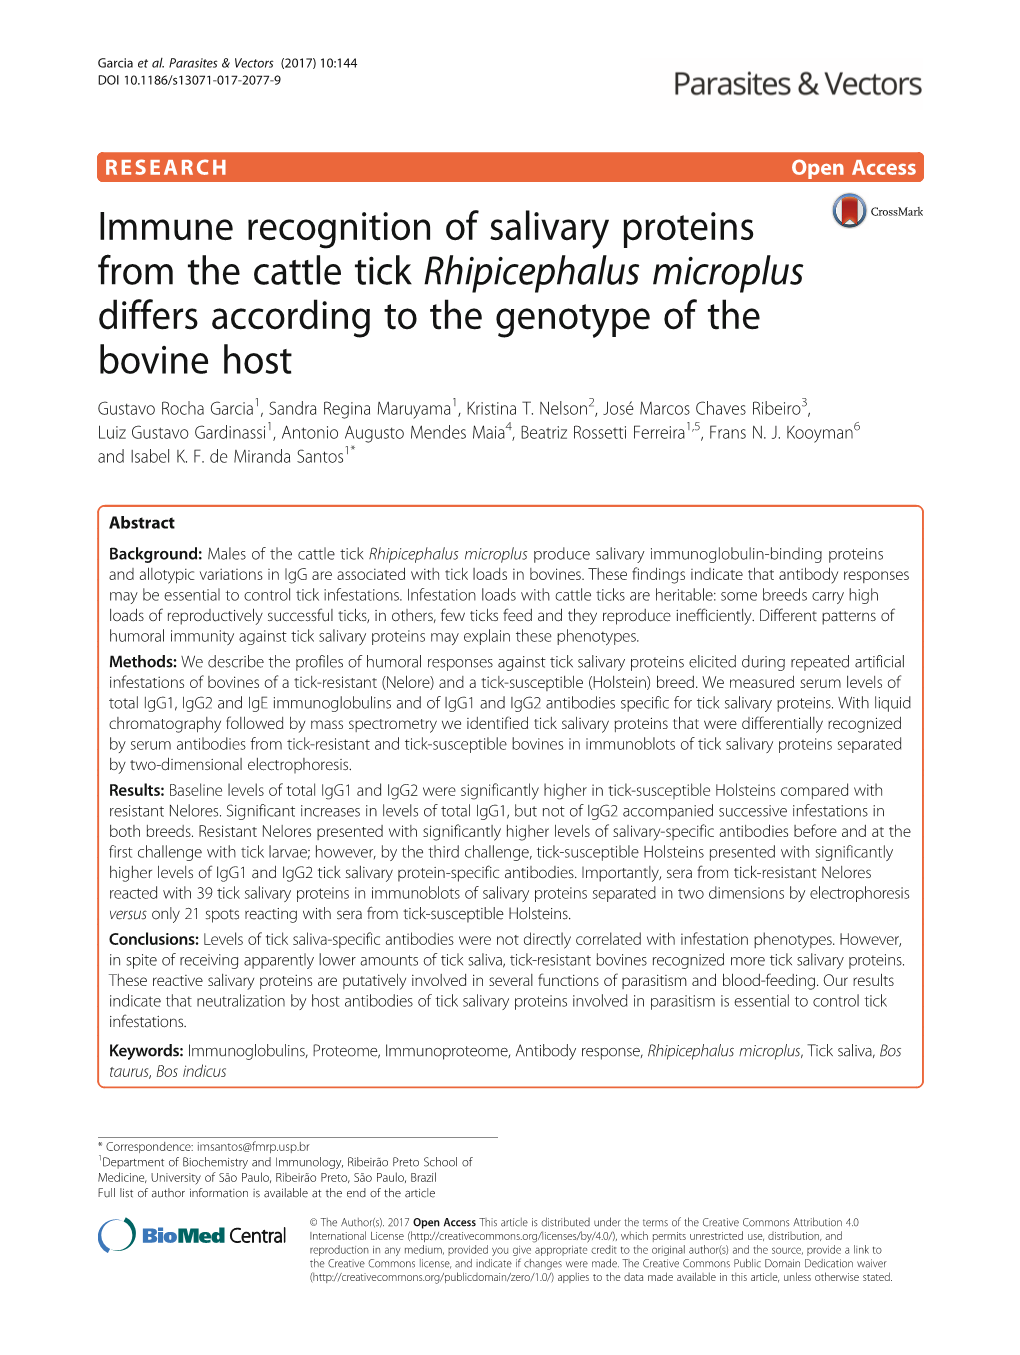 Immune Recognition of Salivary Proteins from the Cattle Tick